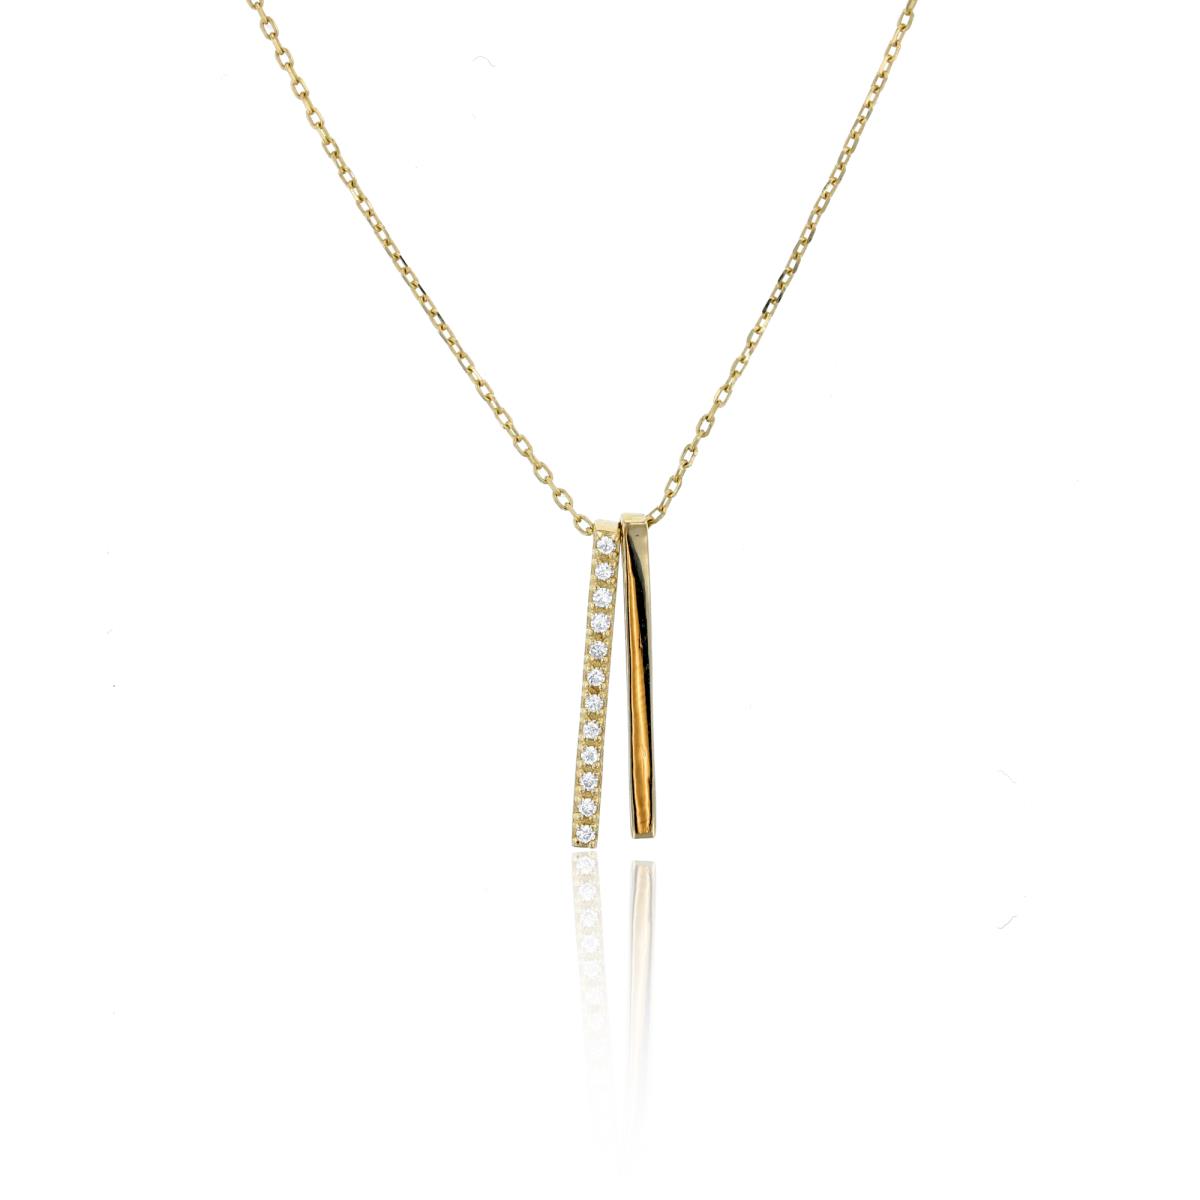 10KY Yellow Gold 18" Polished and Pave Double Vertical Bar Necklace